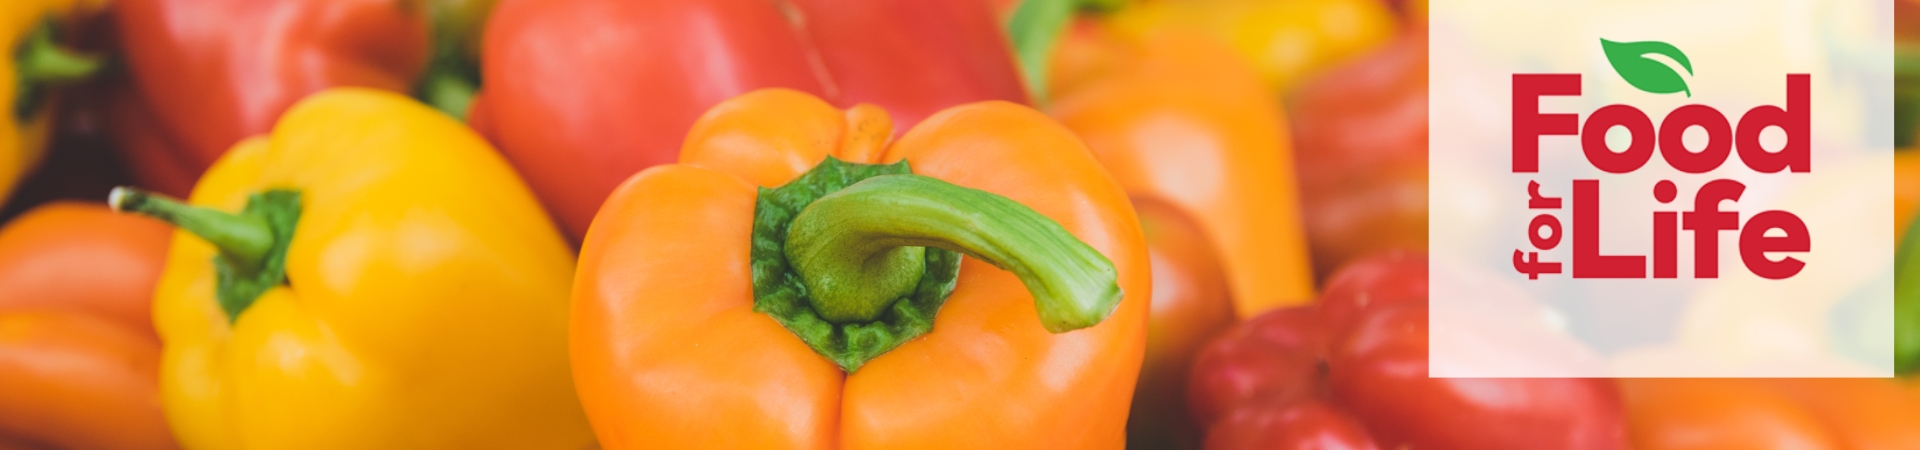 Food for Life logo in the corner of an image of bell peppers